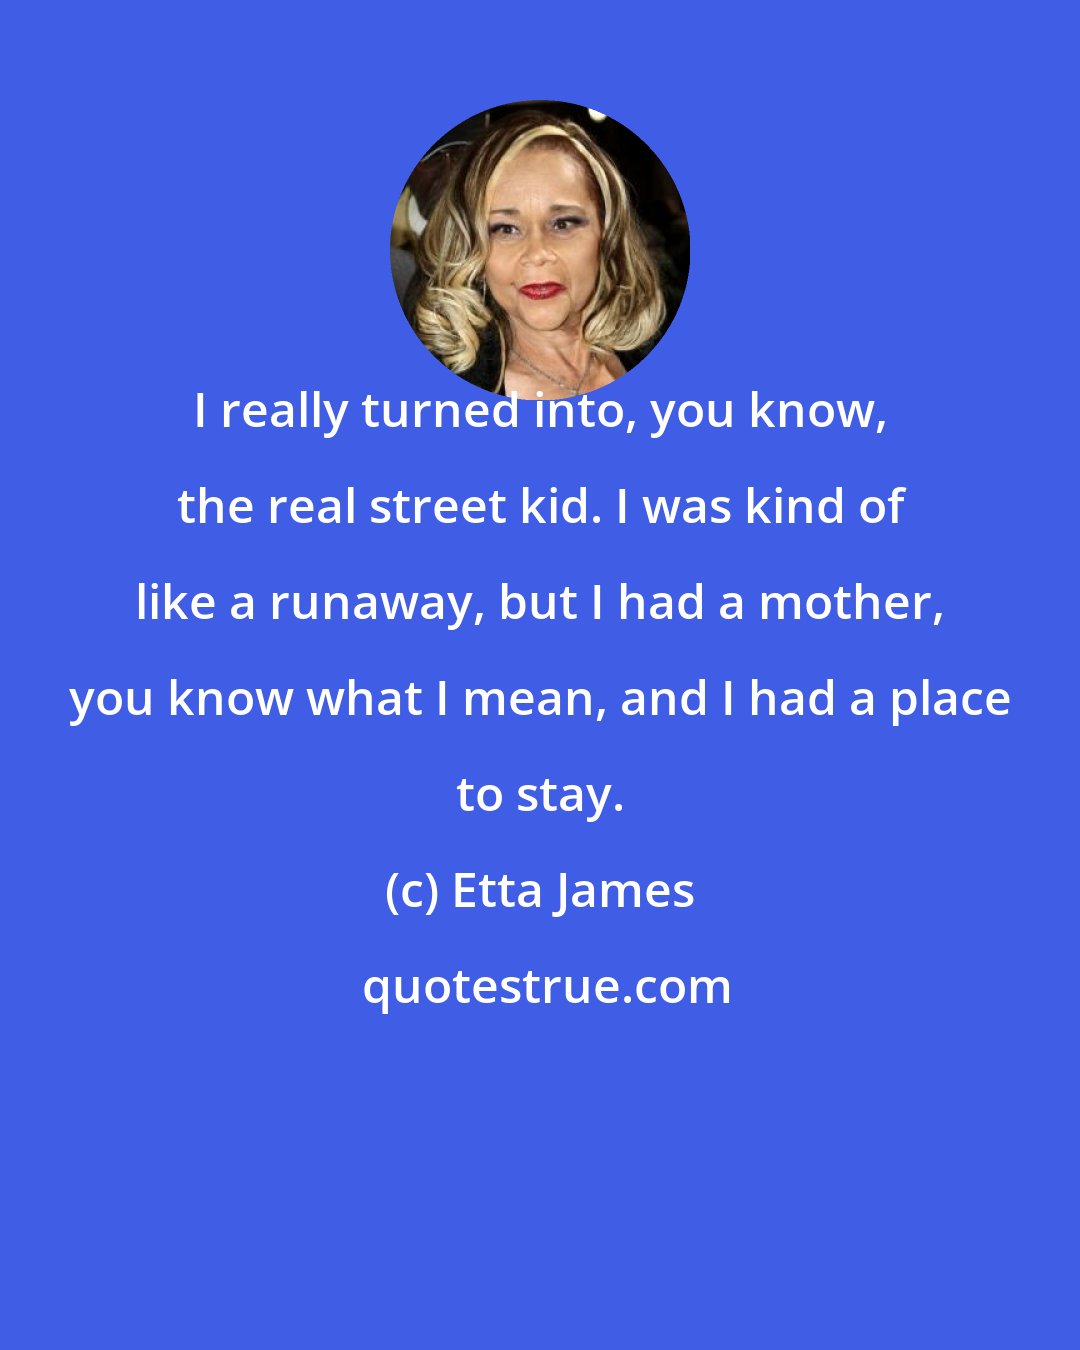 Etta James: I really turned into, you know, the real street kid. I was kind of like a runaway, but I had a mother, you know what I mean, and I had a place to stay.